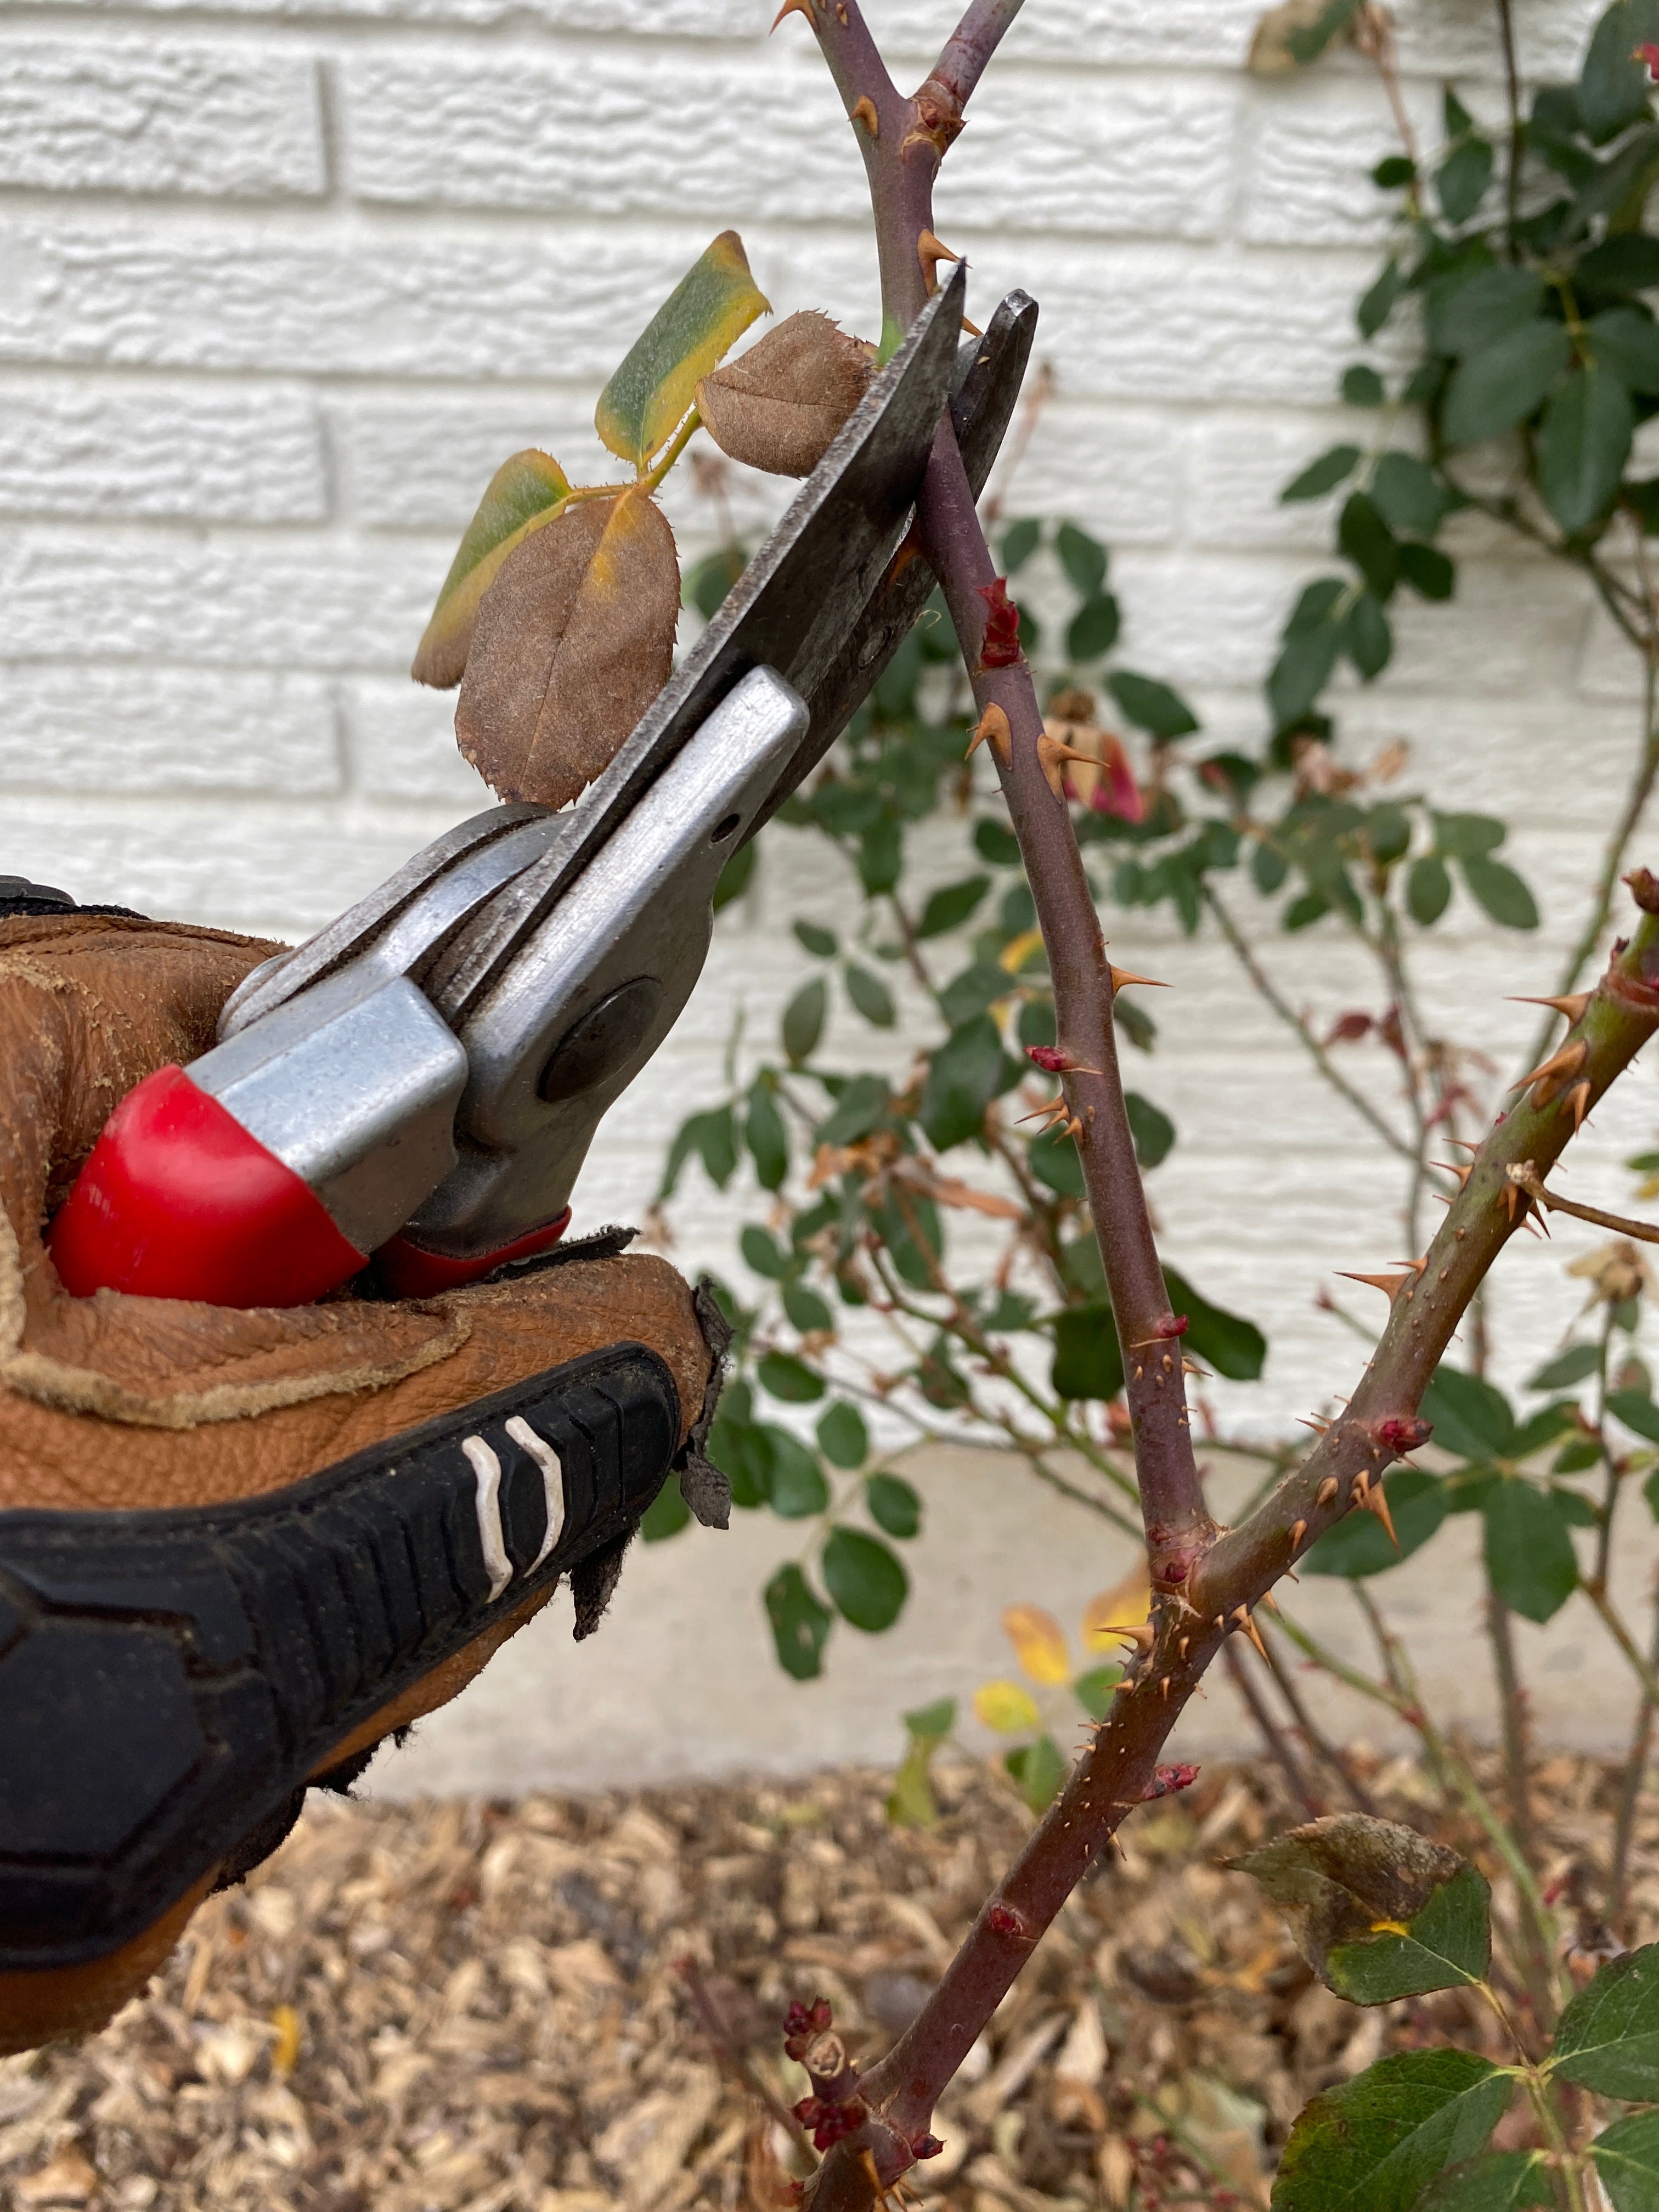 Rose Pruning: How Do You Do It?